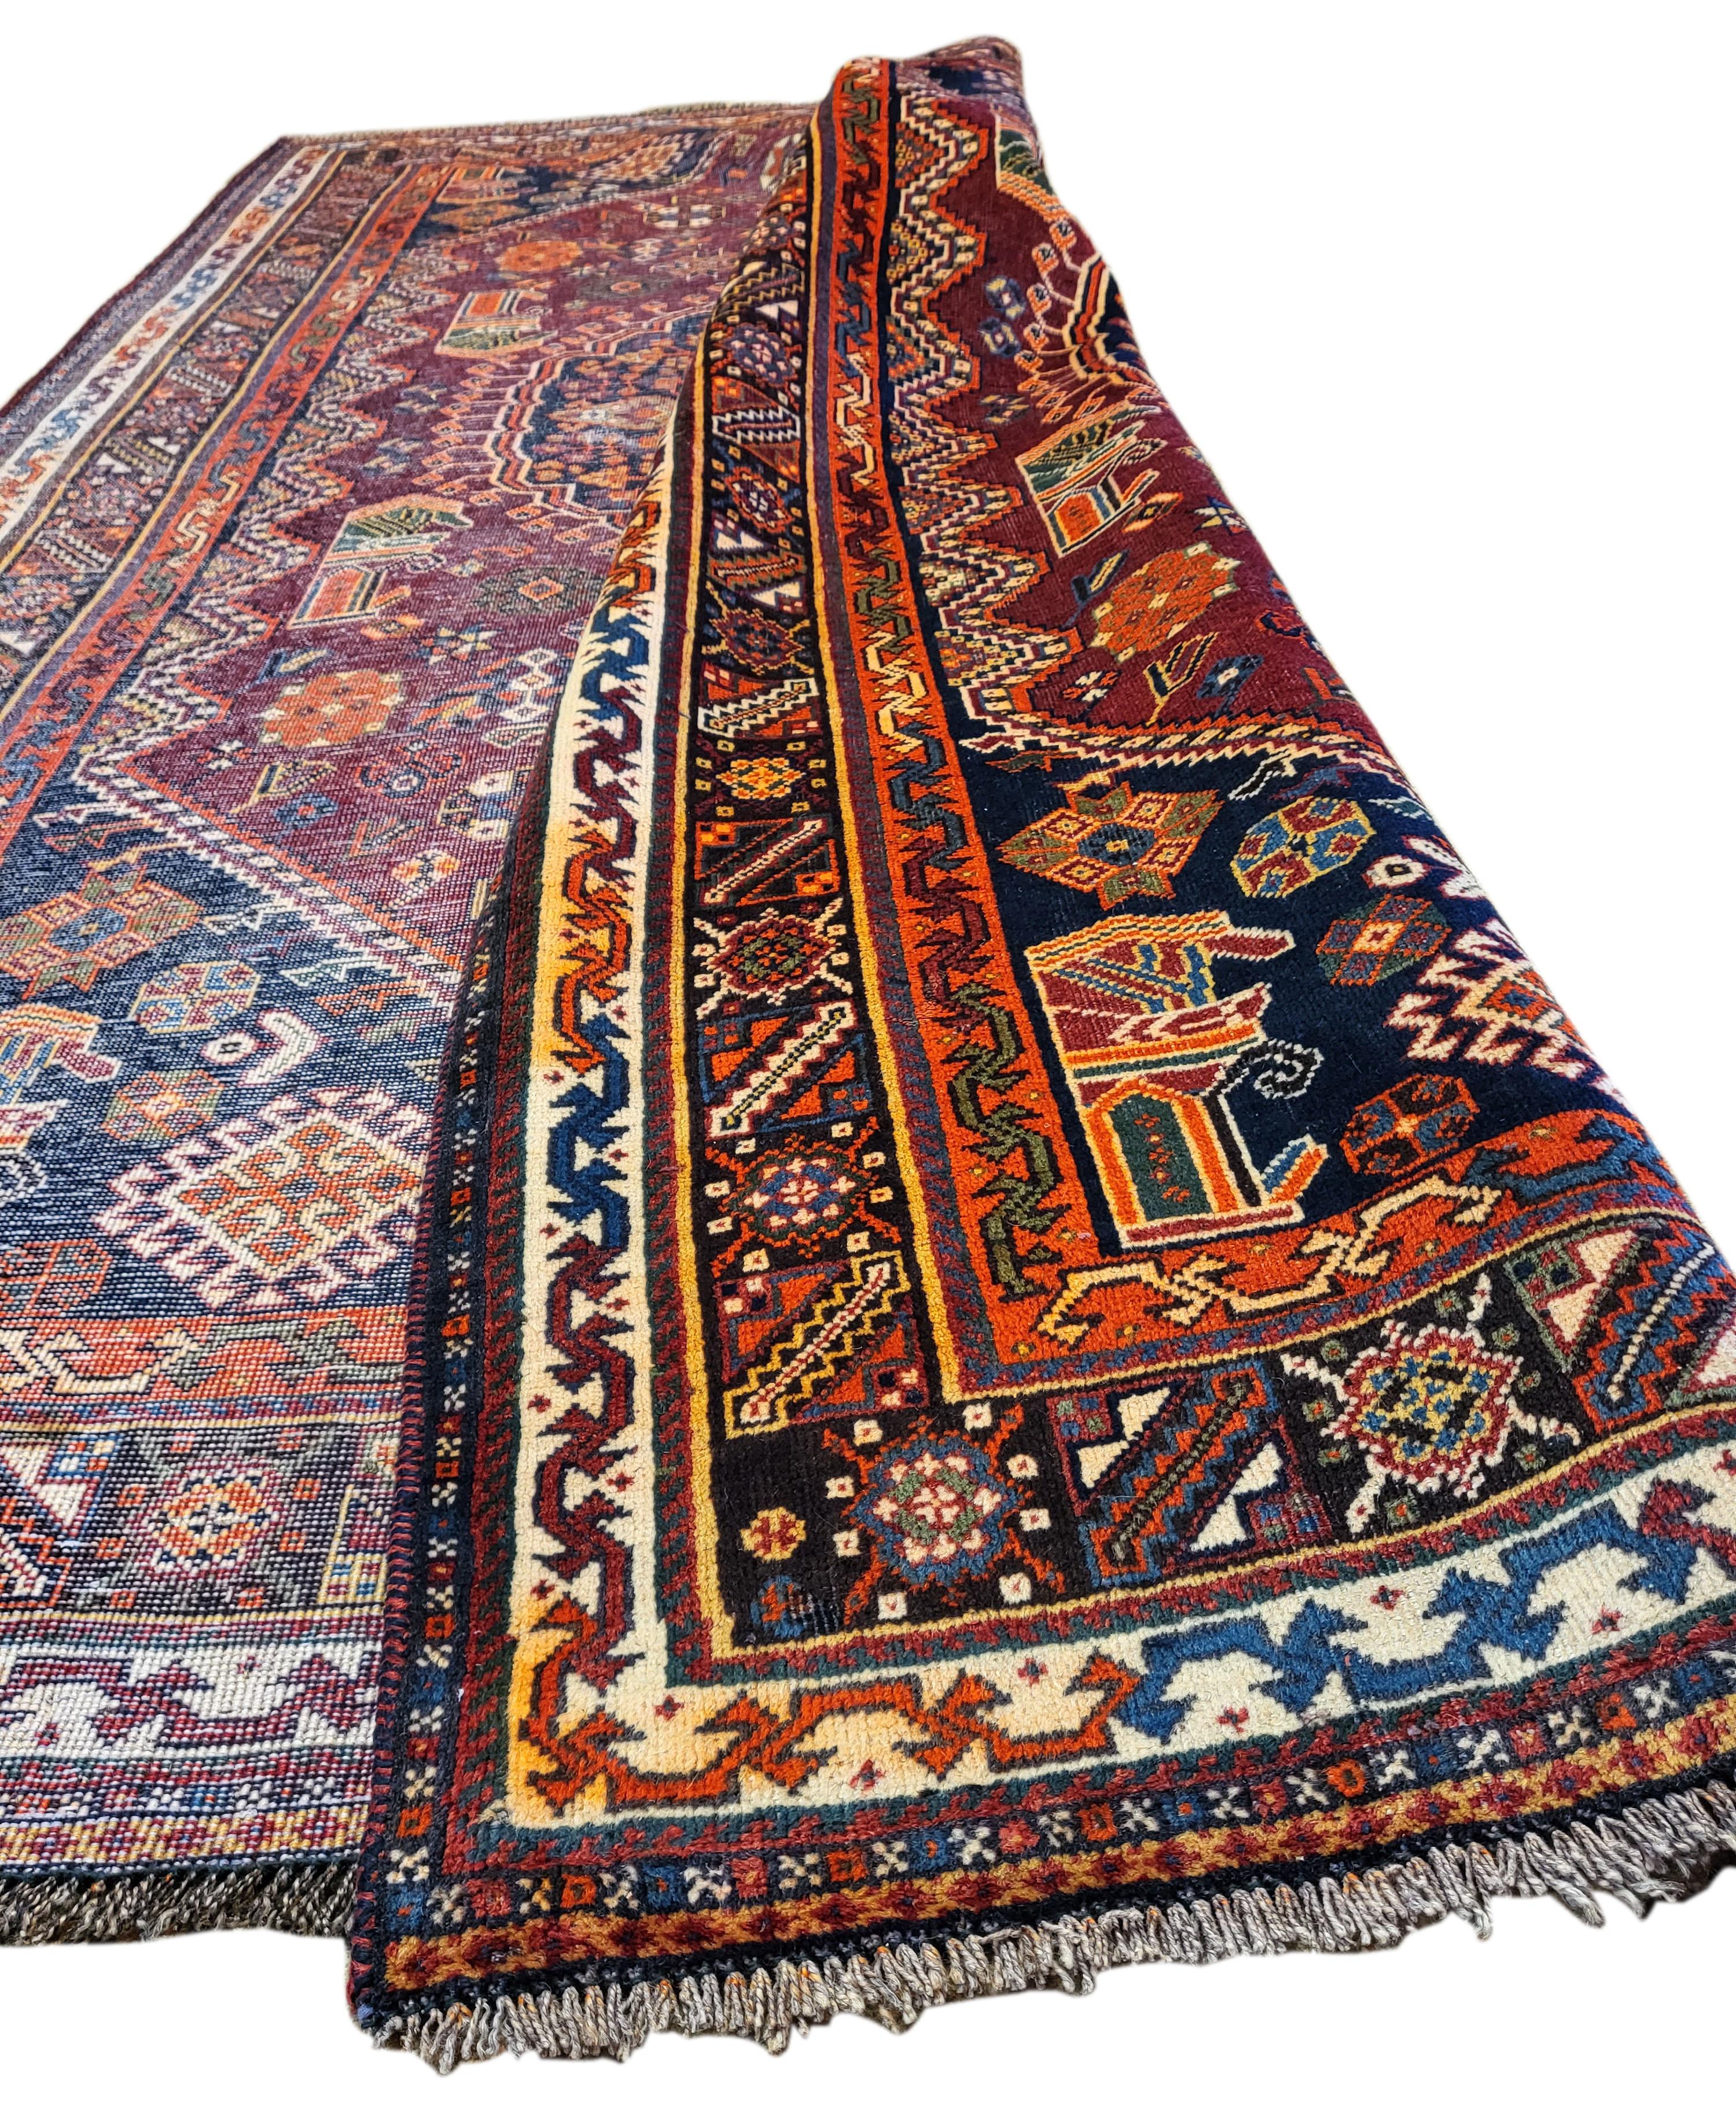 Incredible 60's Persian Qashqai. This breath taking 100% wool rug is a nomadic masterpiece. This piece was masterfully woven by a sub-tribe of the Qashqai's known as The Shiraholi's, known for their striking colors and intricate design. This rug is